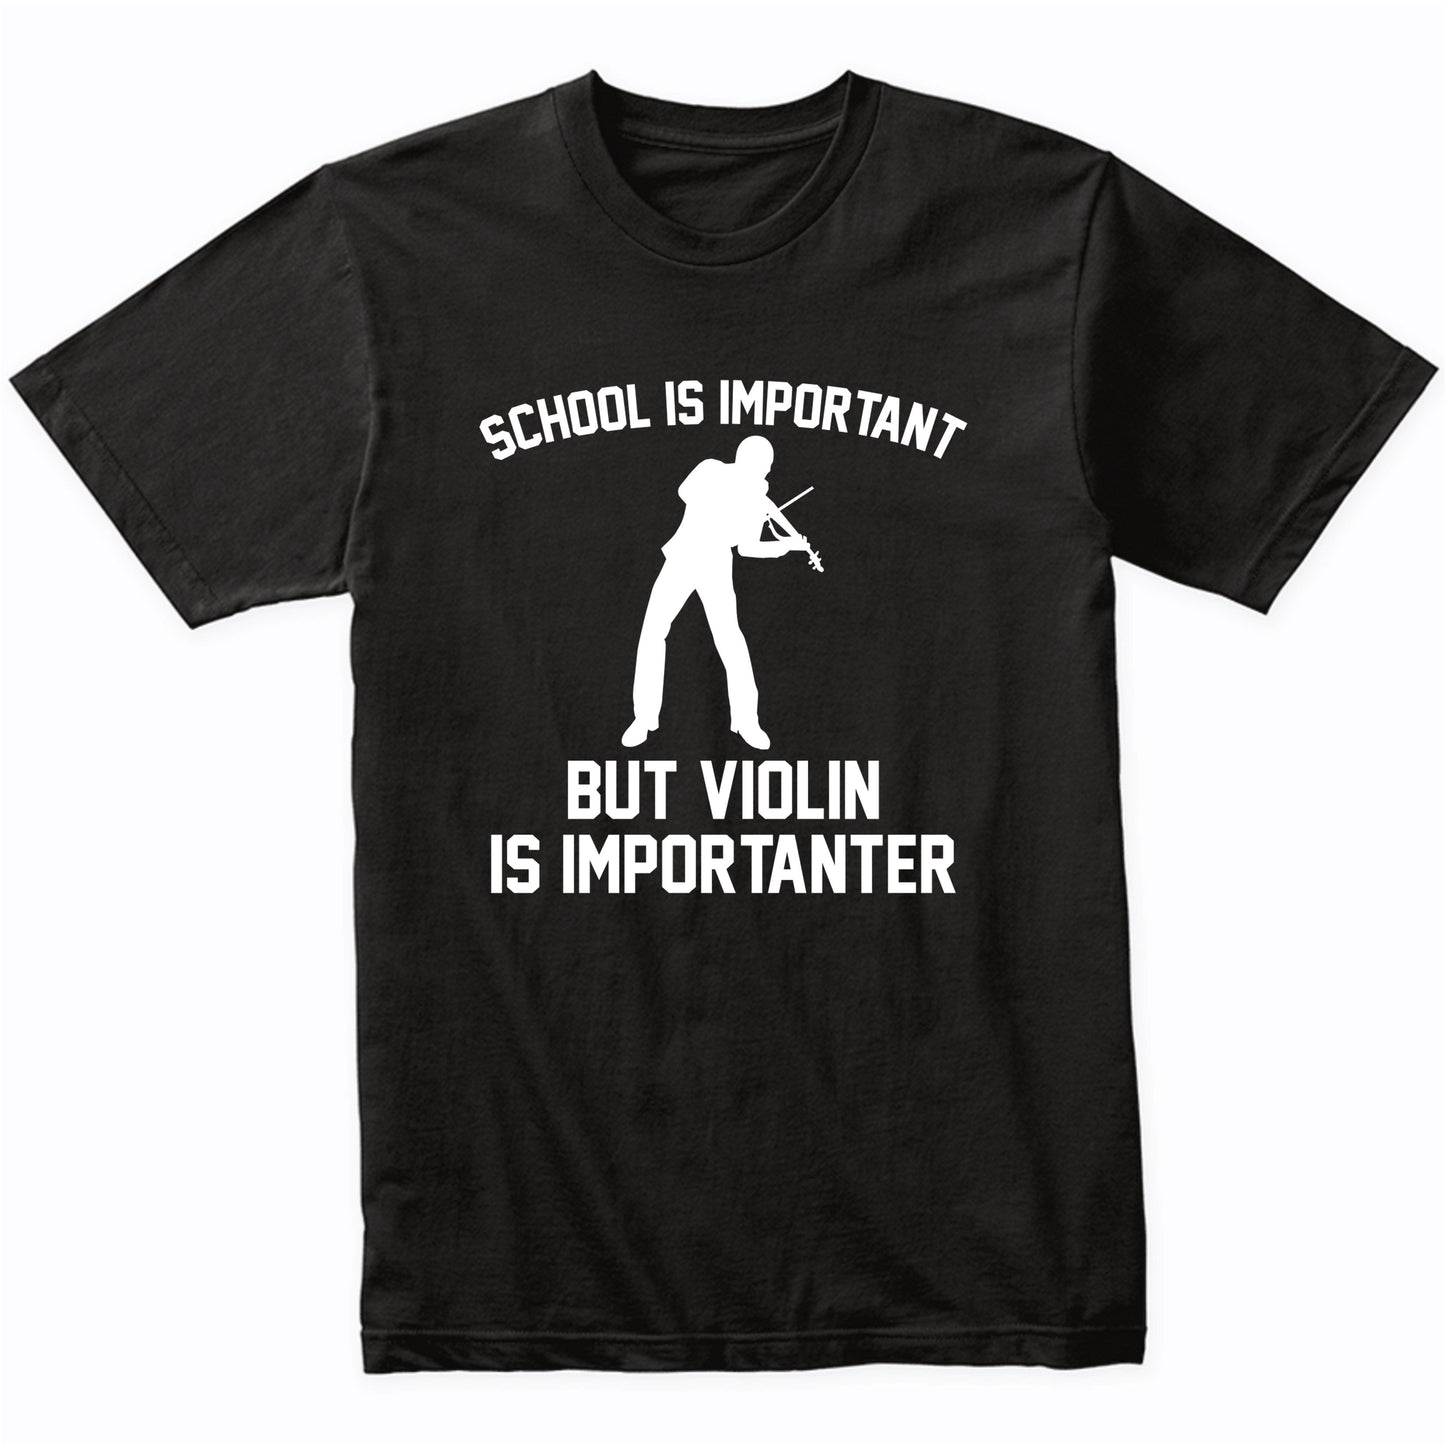 School Is Important But Violin Is Importanter Funny Shirt